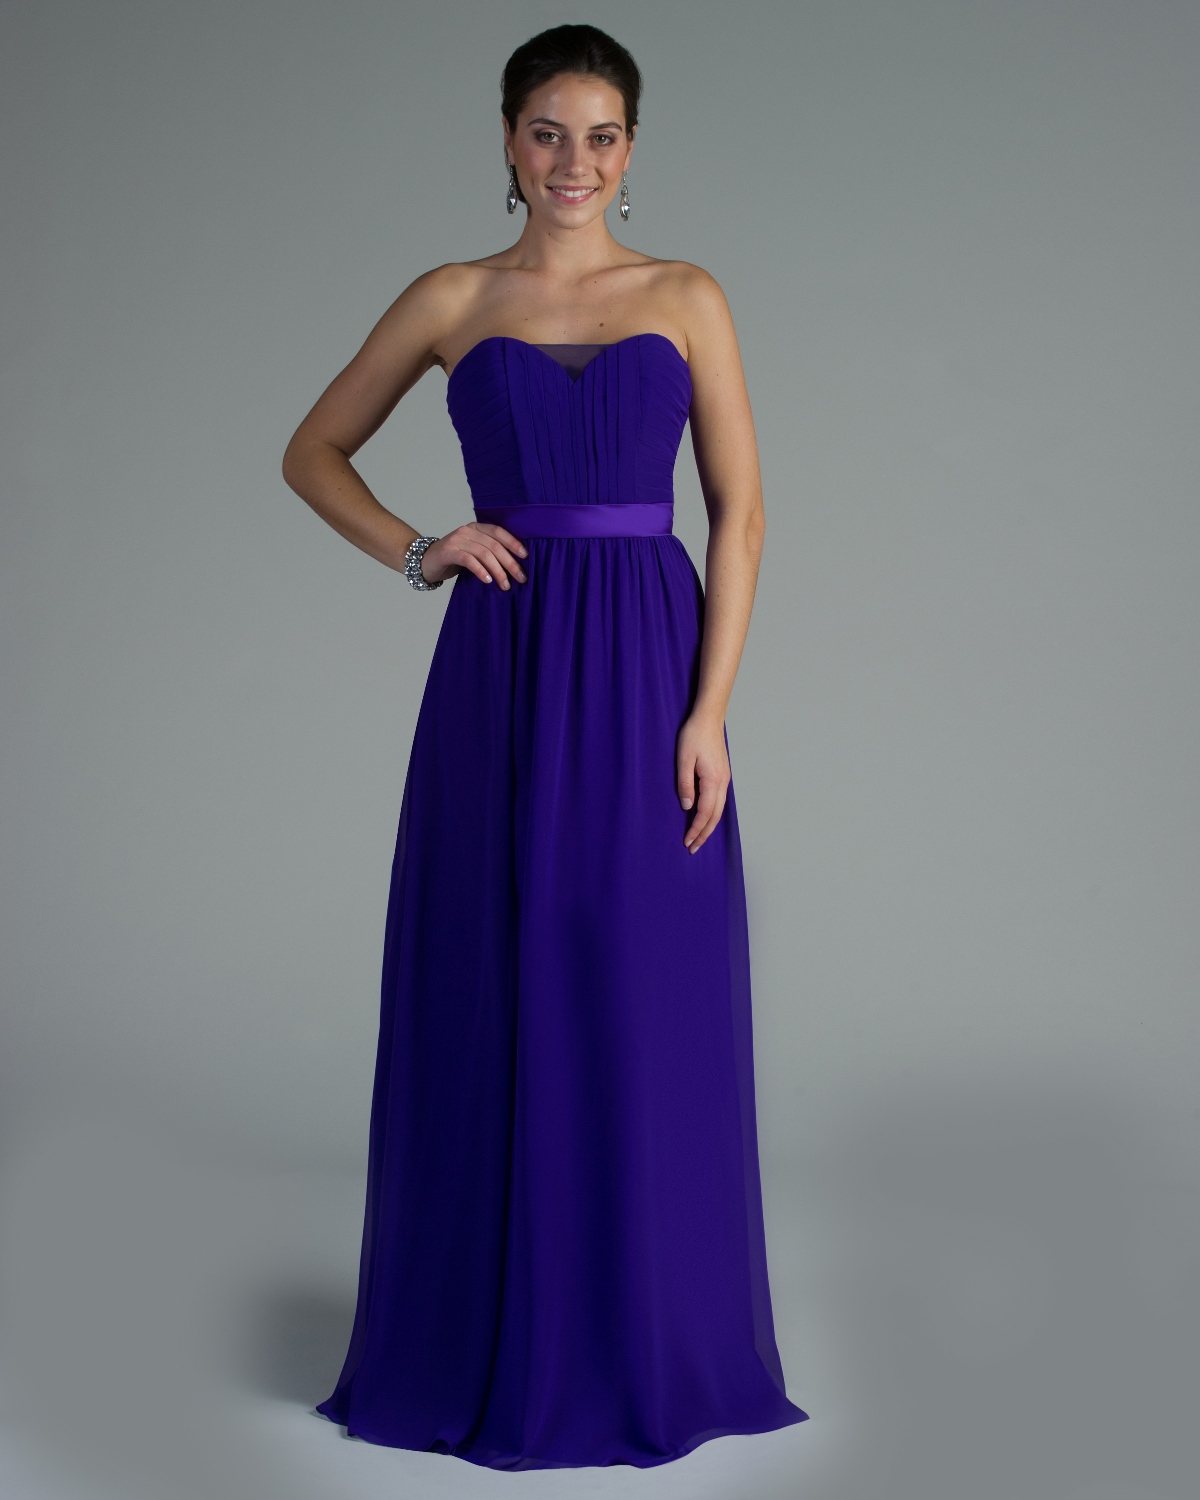 Bridesmaid Dress - Tutto Bene Collection: 2208 - Shown in Violet ...